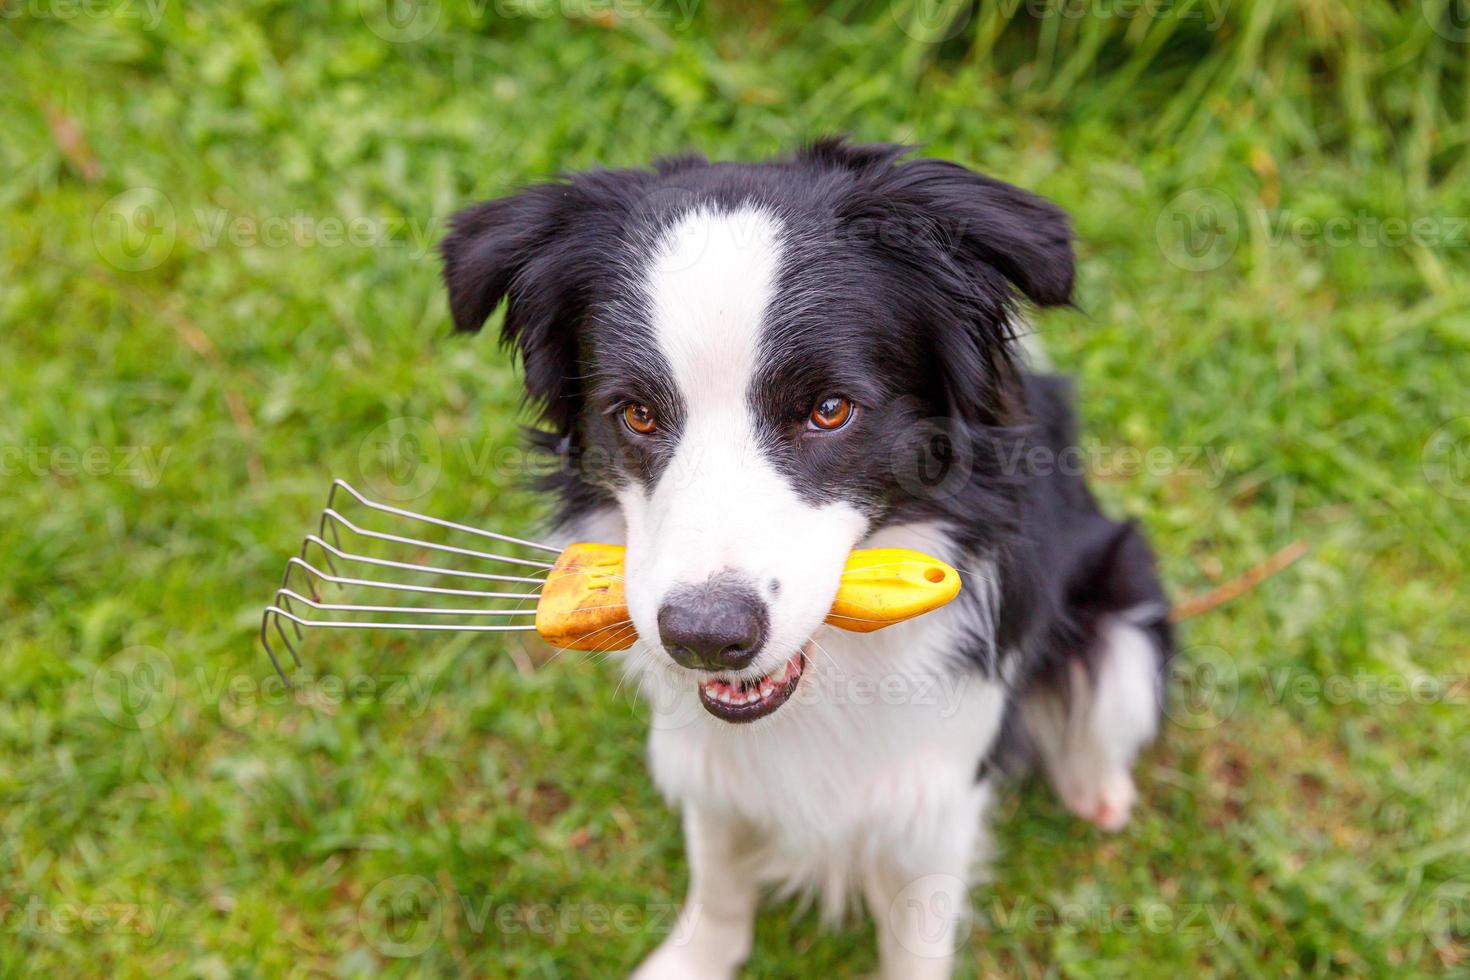 Outdoor portrait of cute smiling dog border collie holding rake on garden background. Funny puppy as gardener fetching rake for weeding. Gardening and agriculture concept. photo